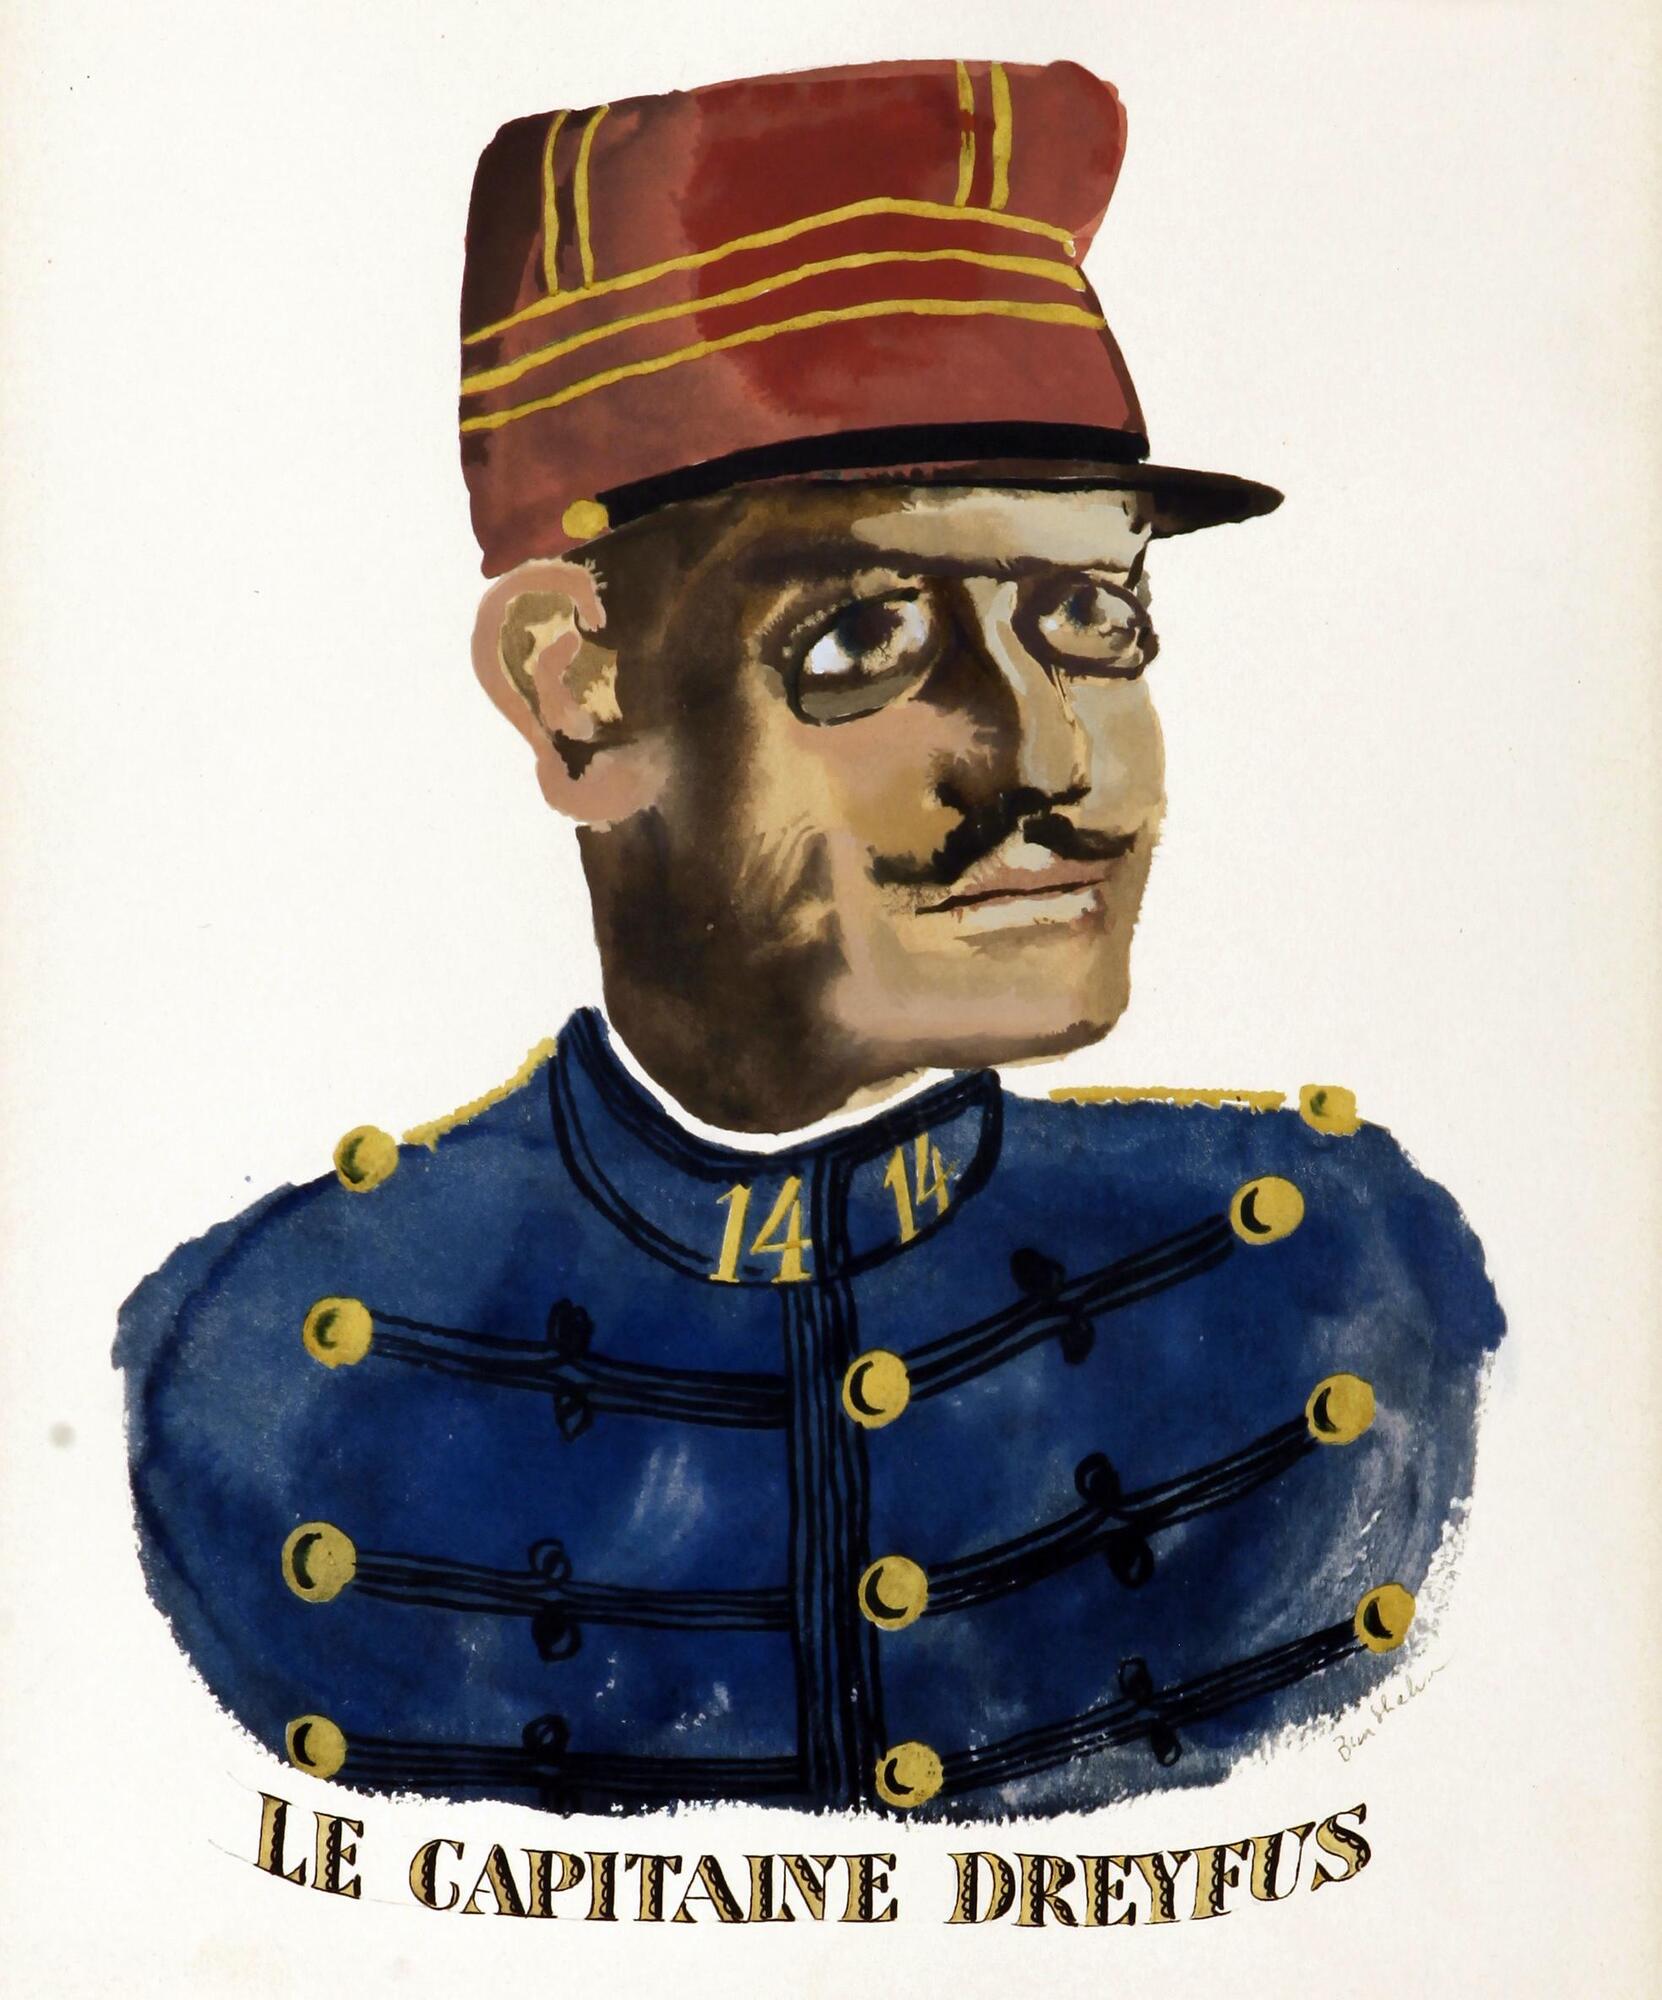 A portrait of Captain Dreyfus: The bust of a man in uniform stands pivoted to the right.  His expression is neutral and his likeness is painted with bold colors in a watercolor-like texture.  Below the bust reads "Le Capitaine Dreyfus", or The Captain Dreyfus.